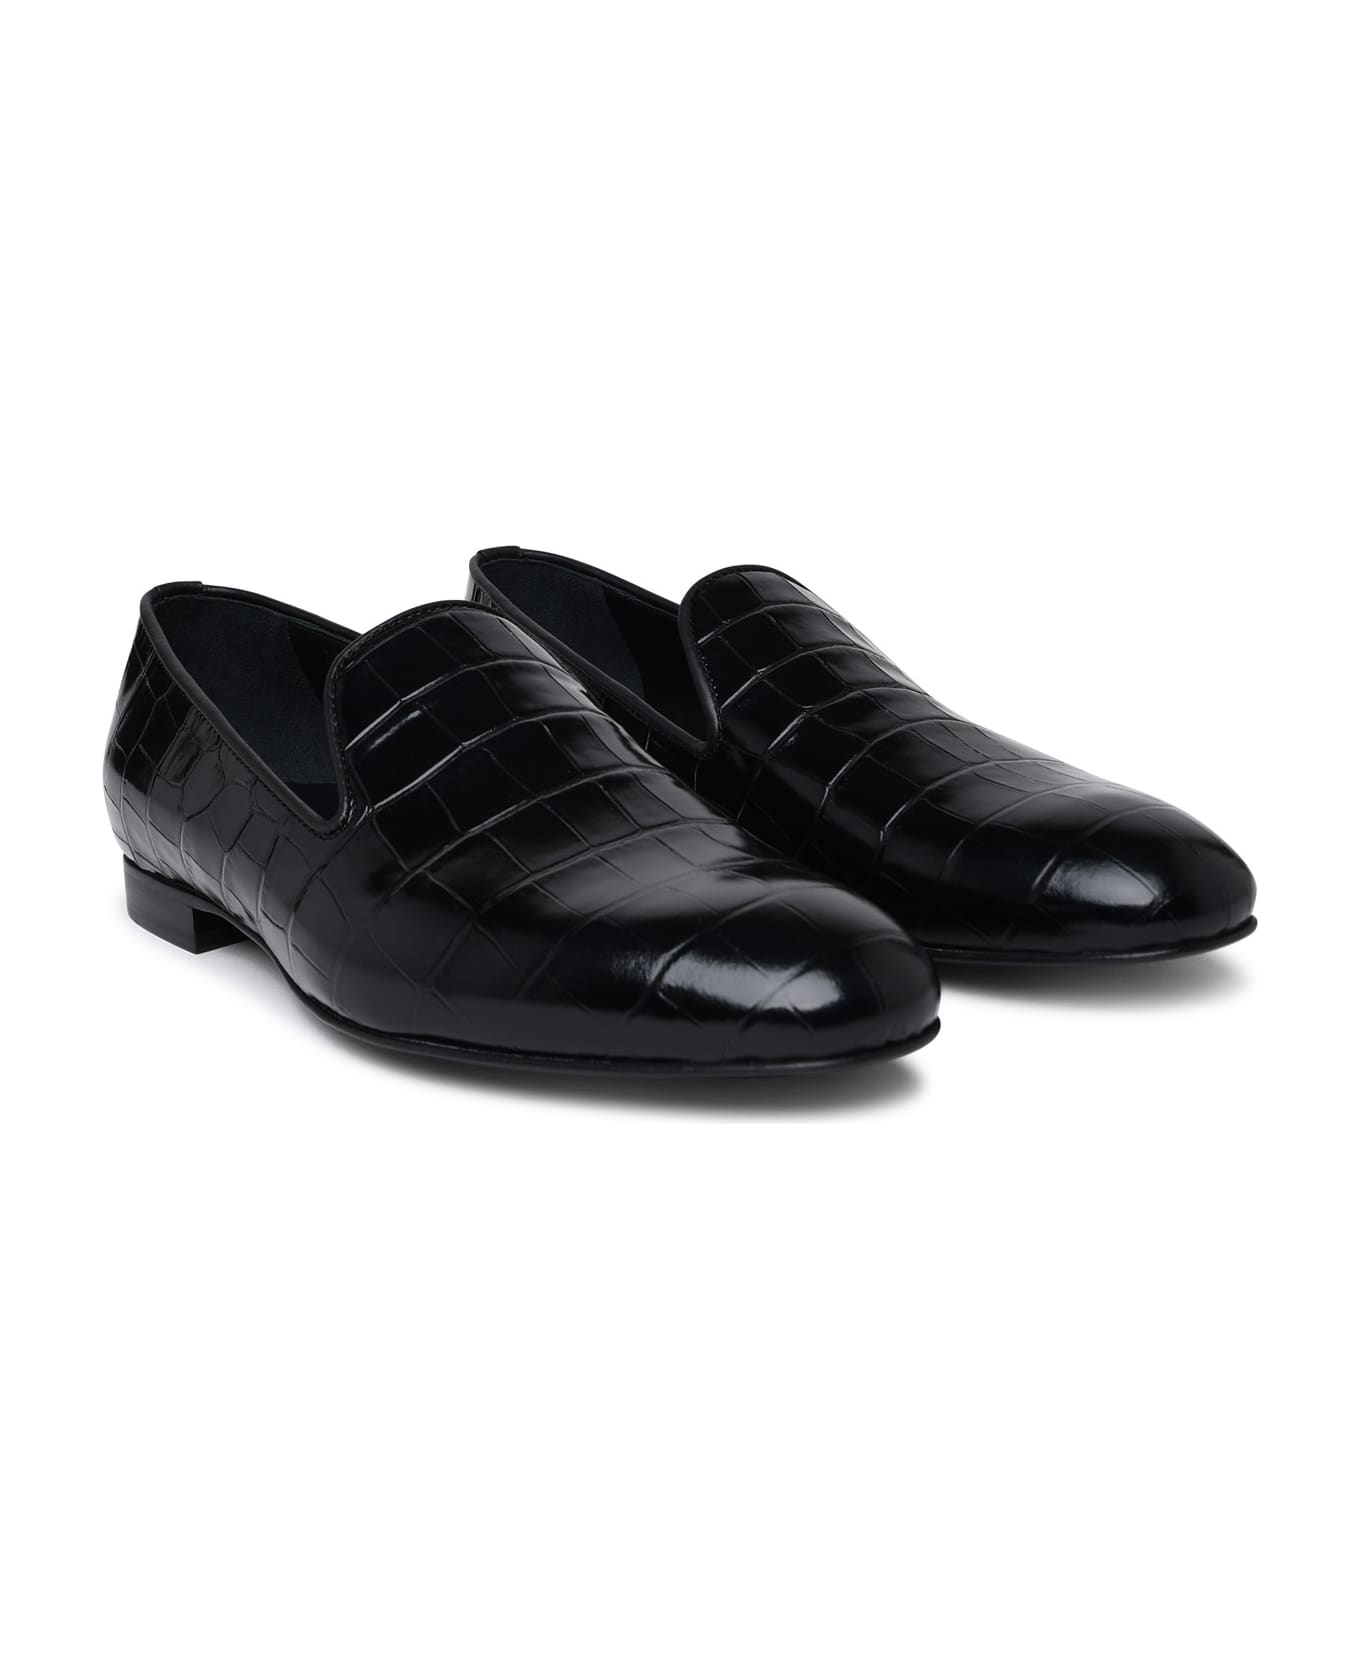 Versace Black Calf Leather Loafers - BLACK